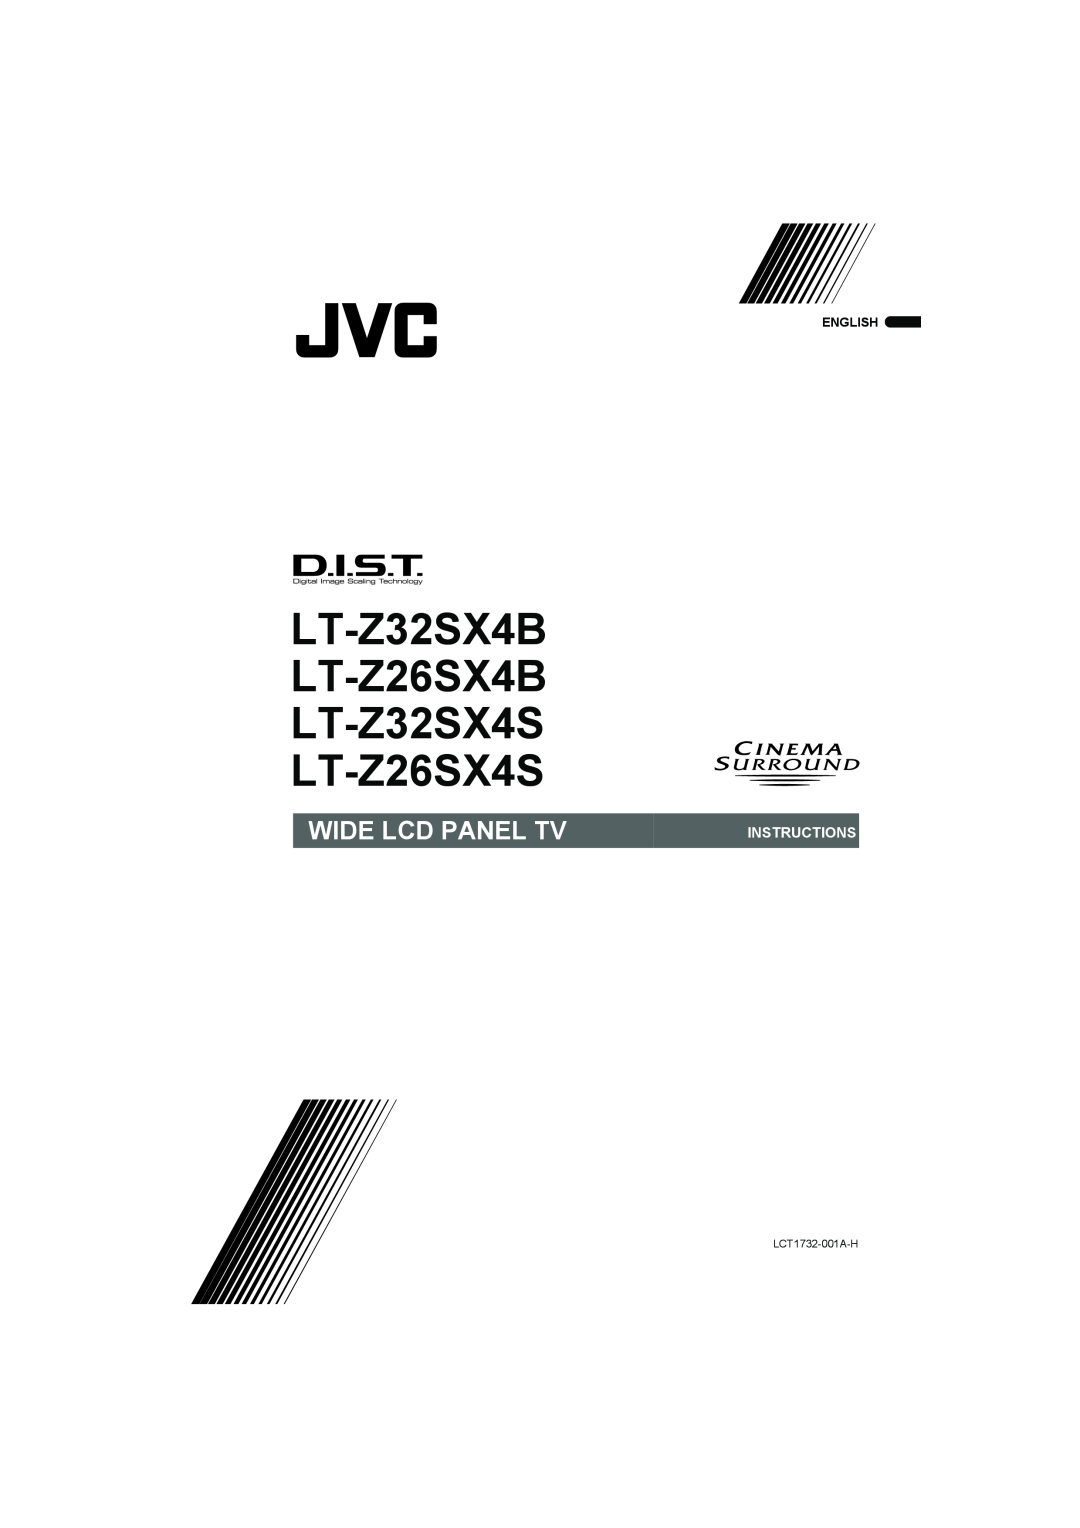 JVC manual LT-Z32SX4B LT-Z26SX4B LT-Z32SX4S LT-Z26SX4S, Wide Lcd Panel Tv, Instructions, English, LCT1732-001A-H 